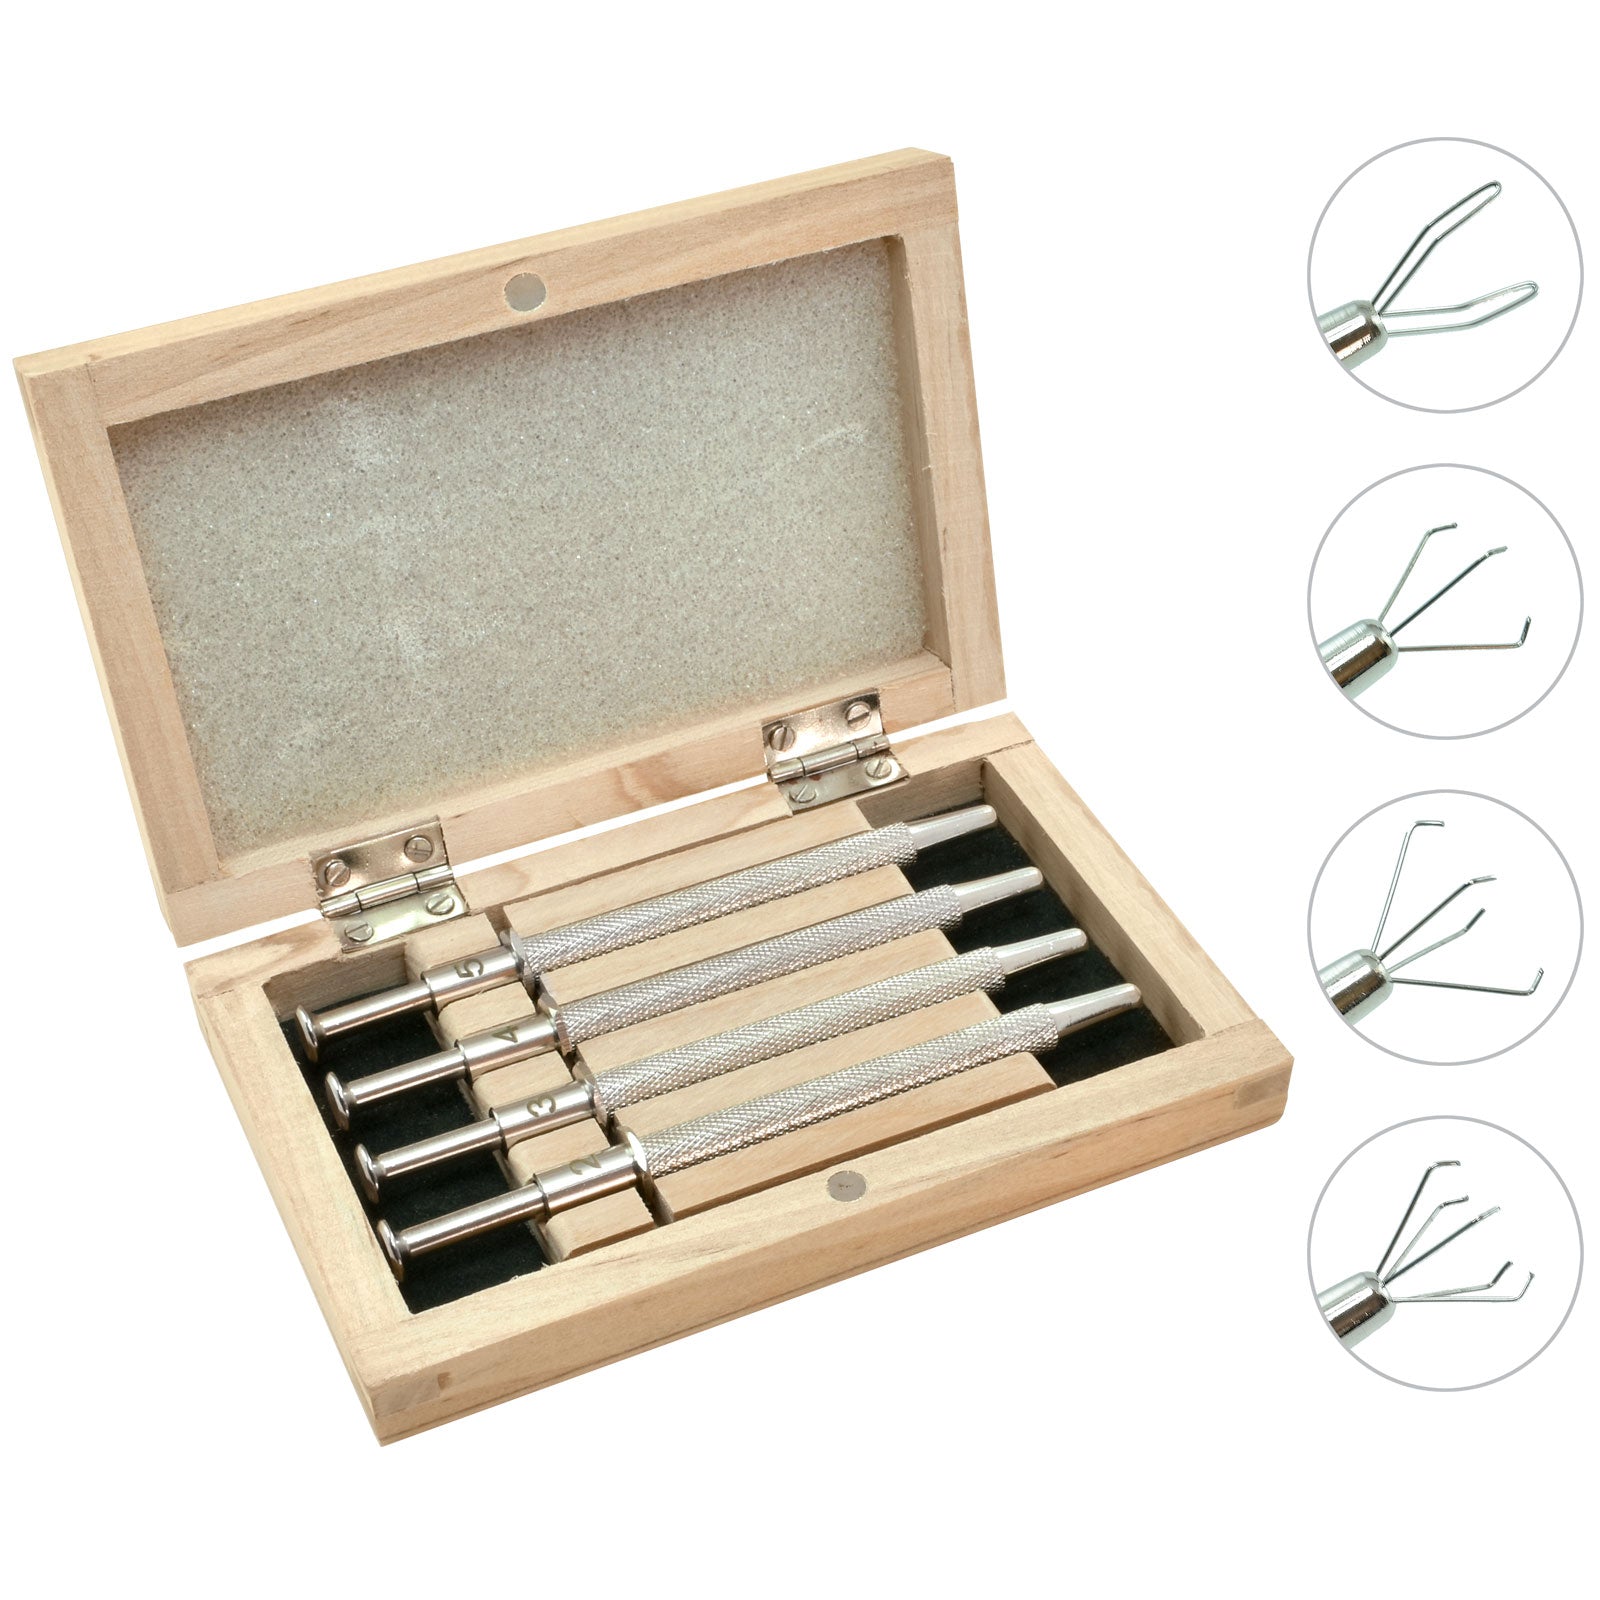 4 - Piece Gripster Grabbing/Holding Tool Set